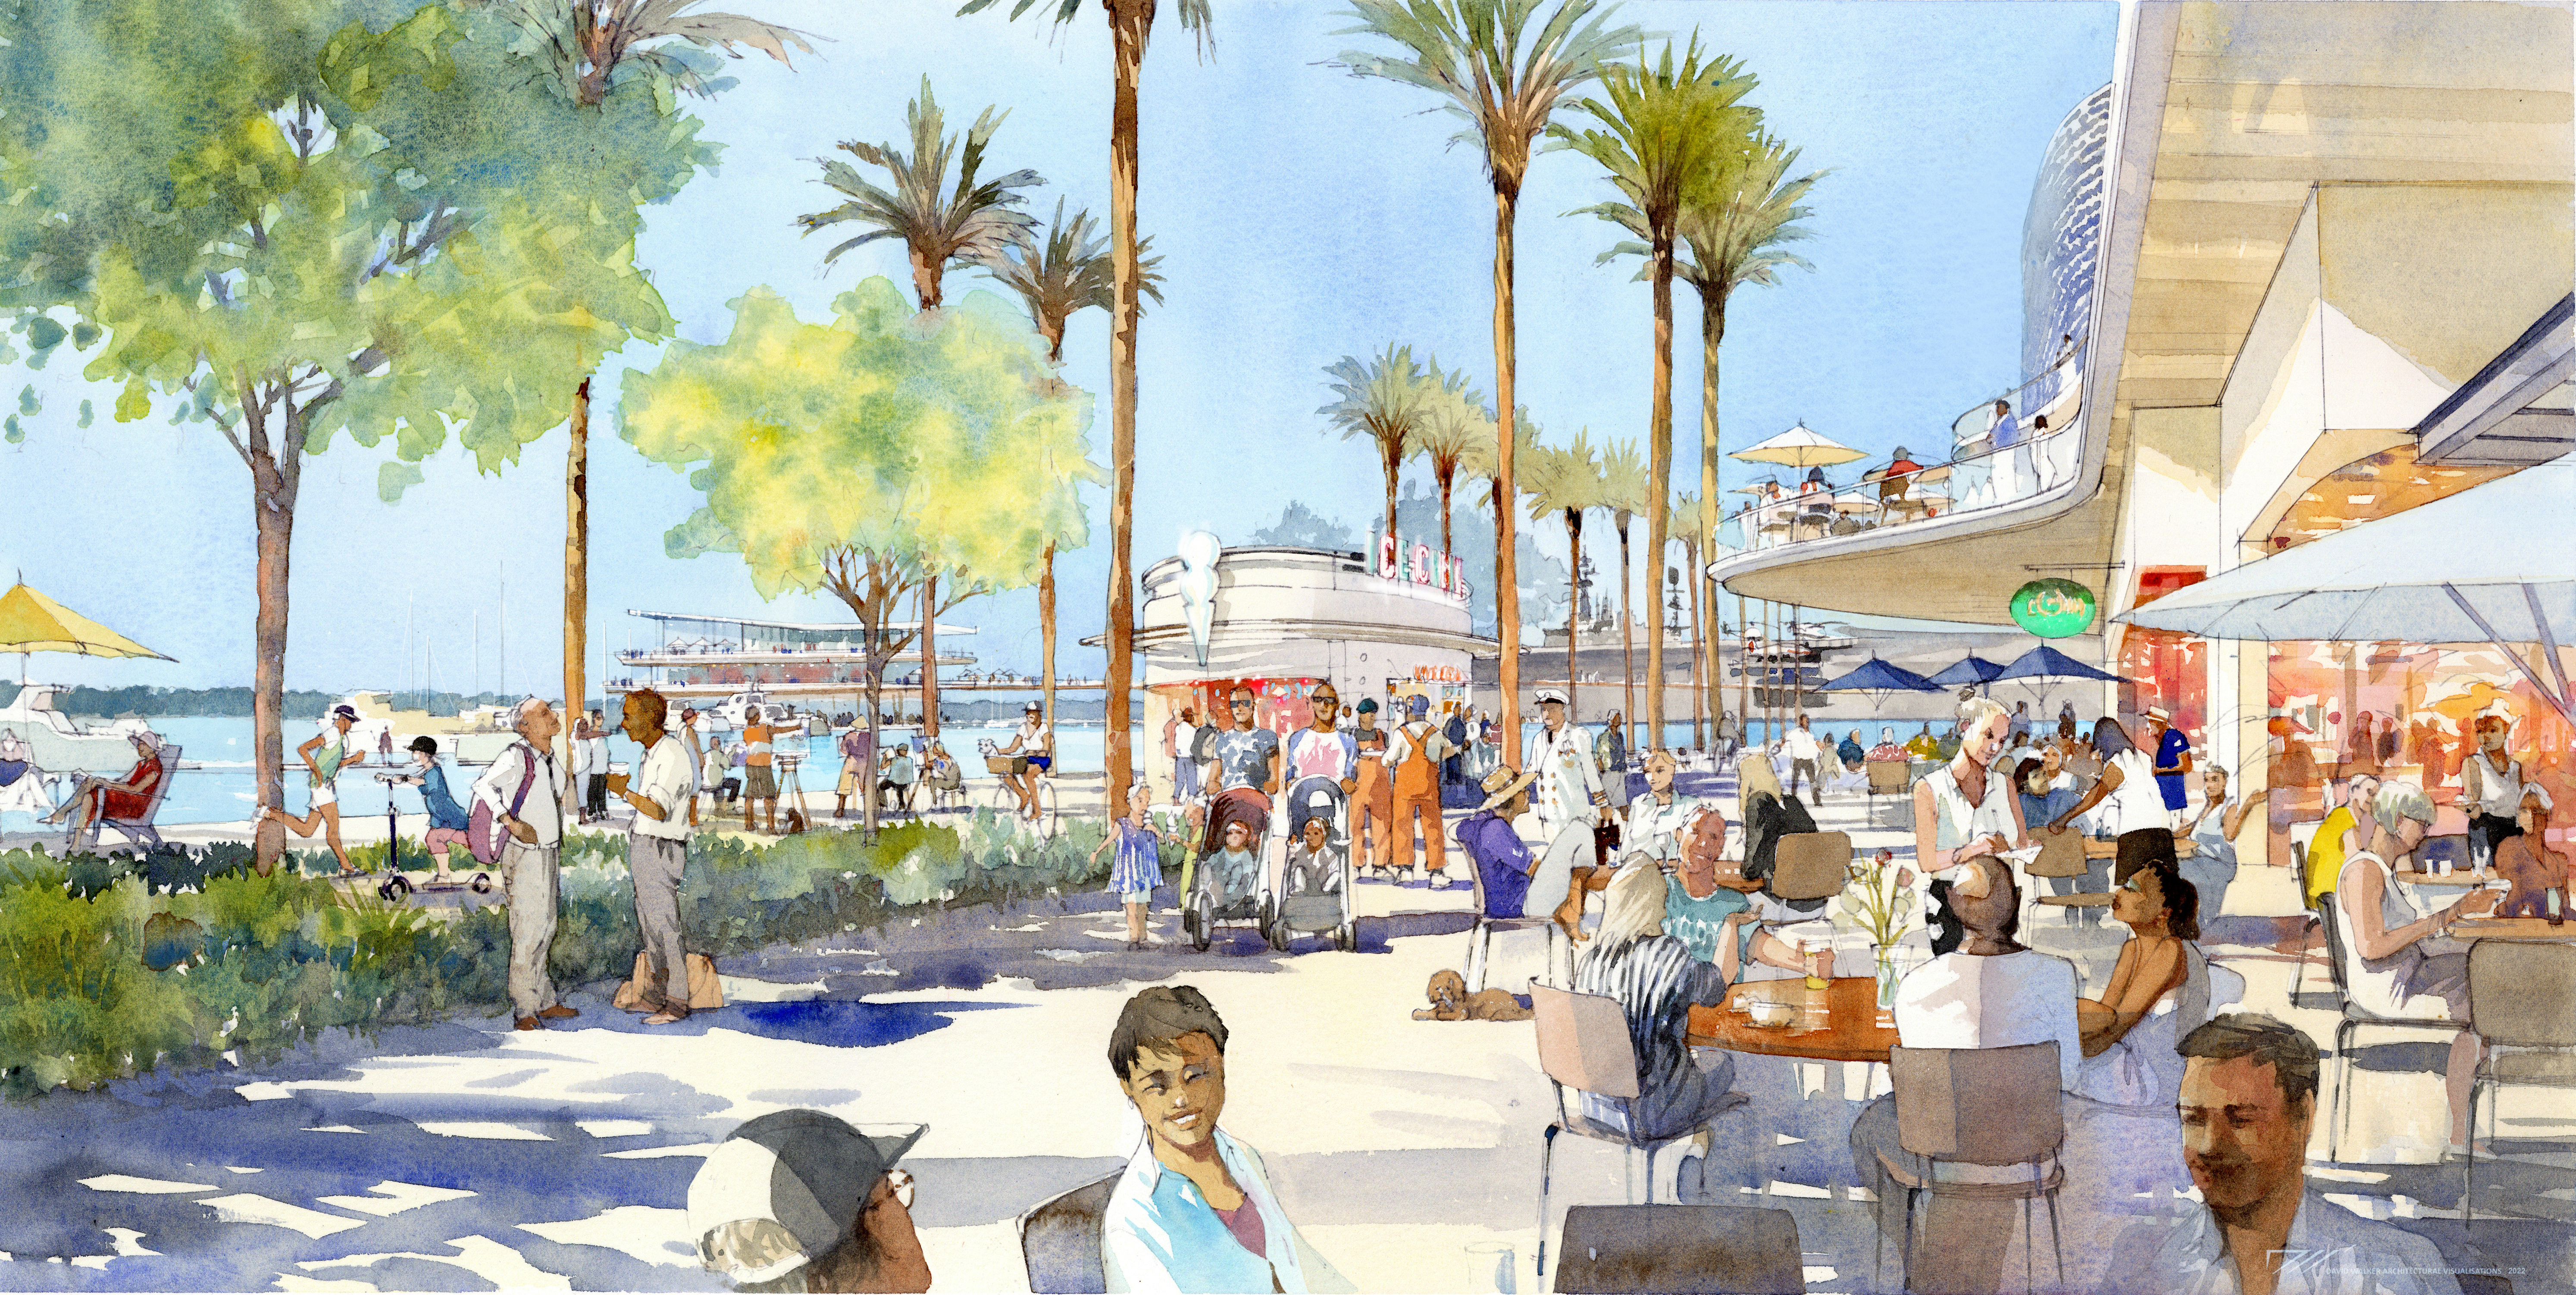 Artist rendering of people dining and relaxing on the promenade